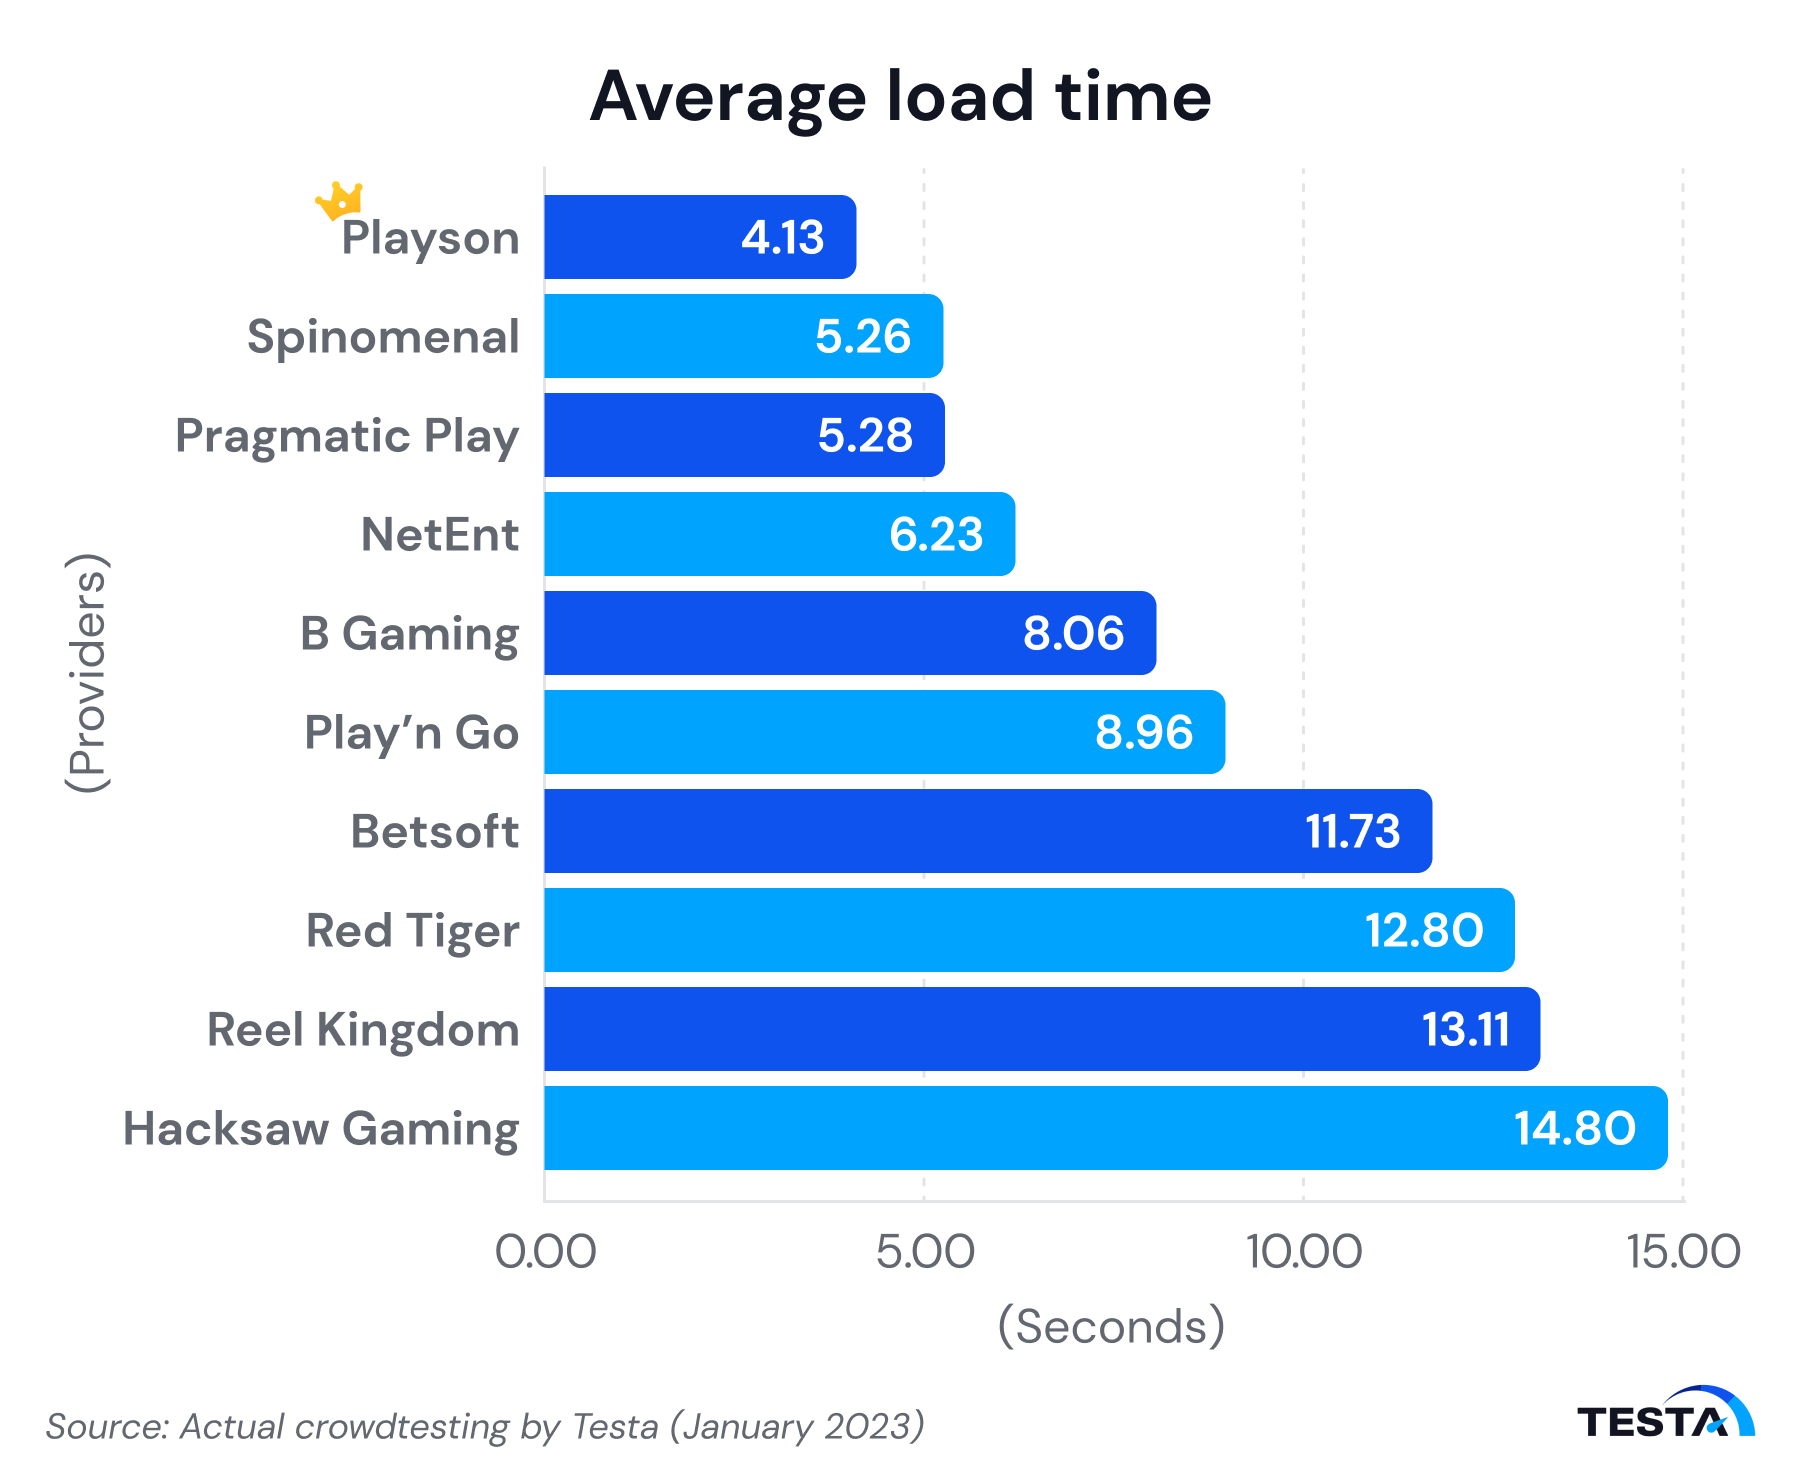 India’s iGaming providers average load time